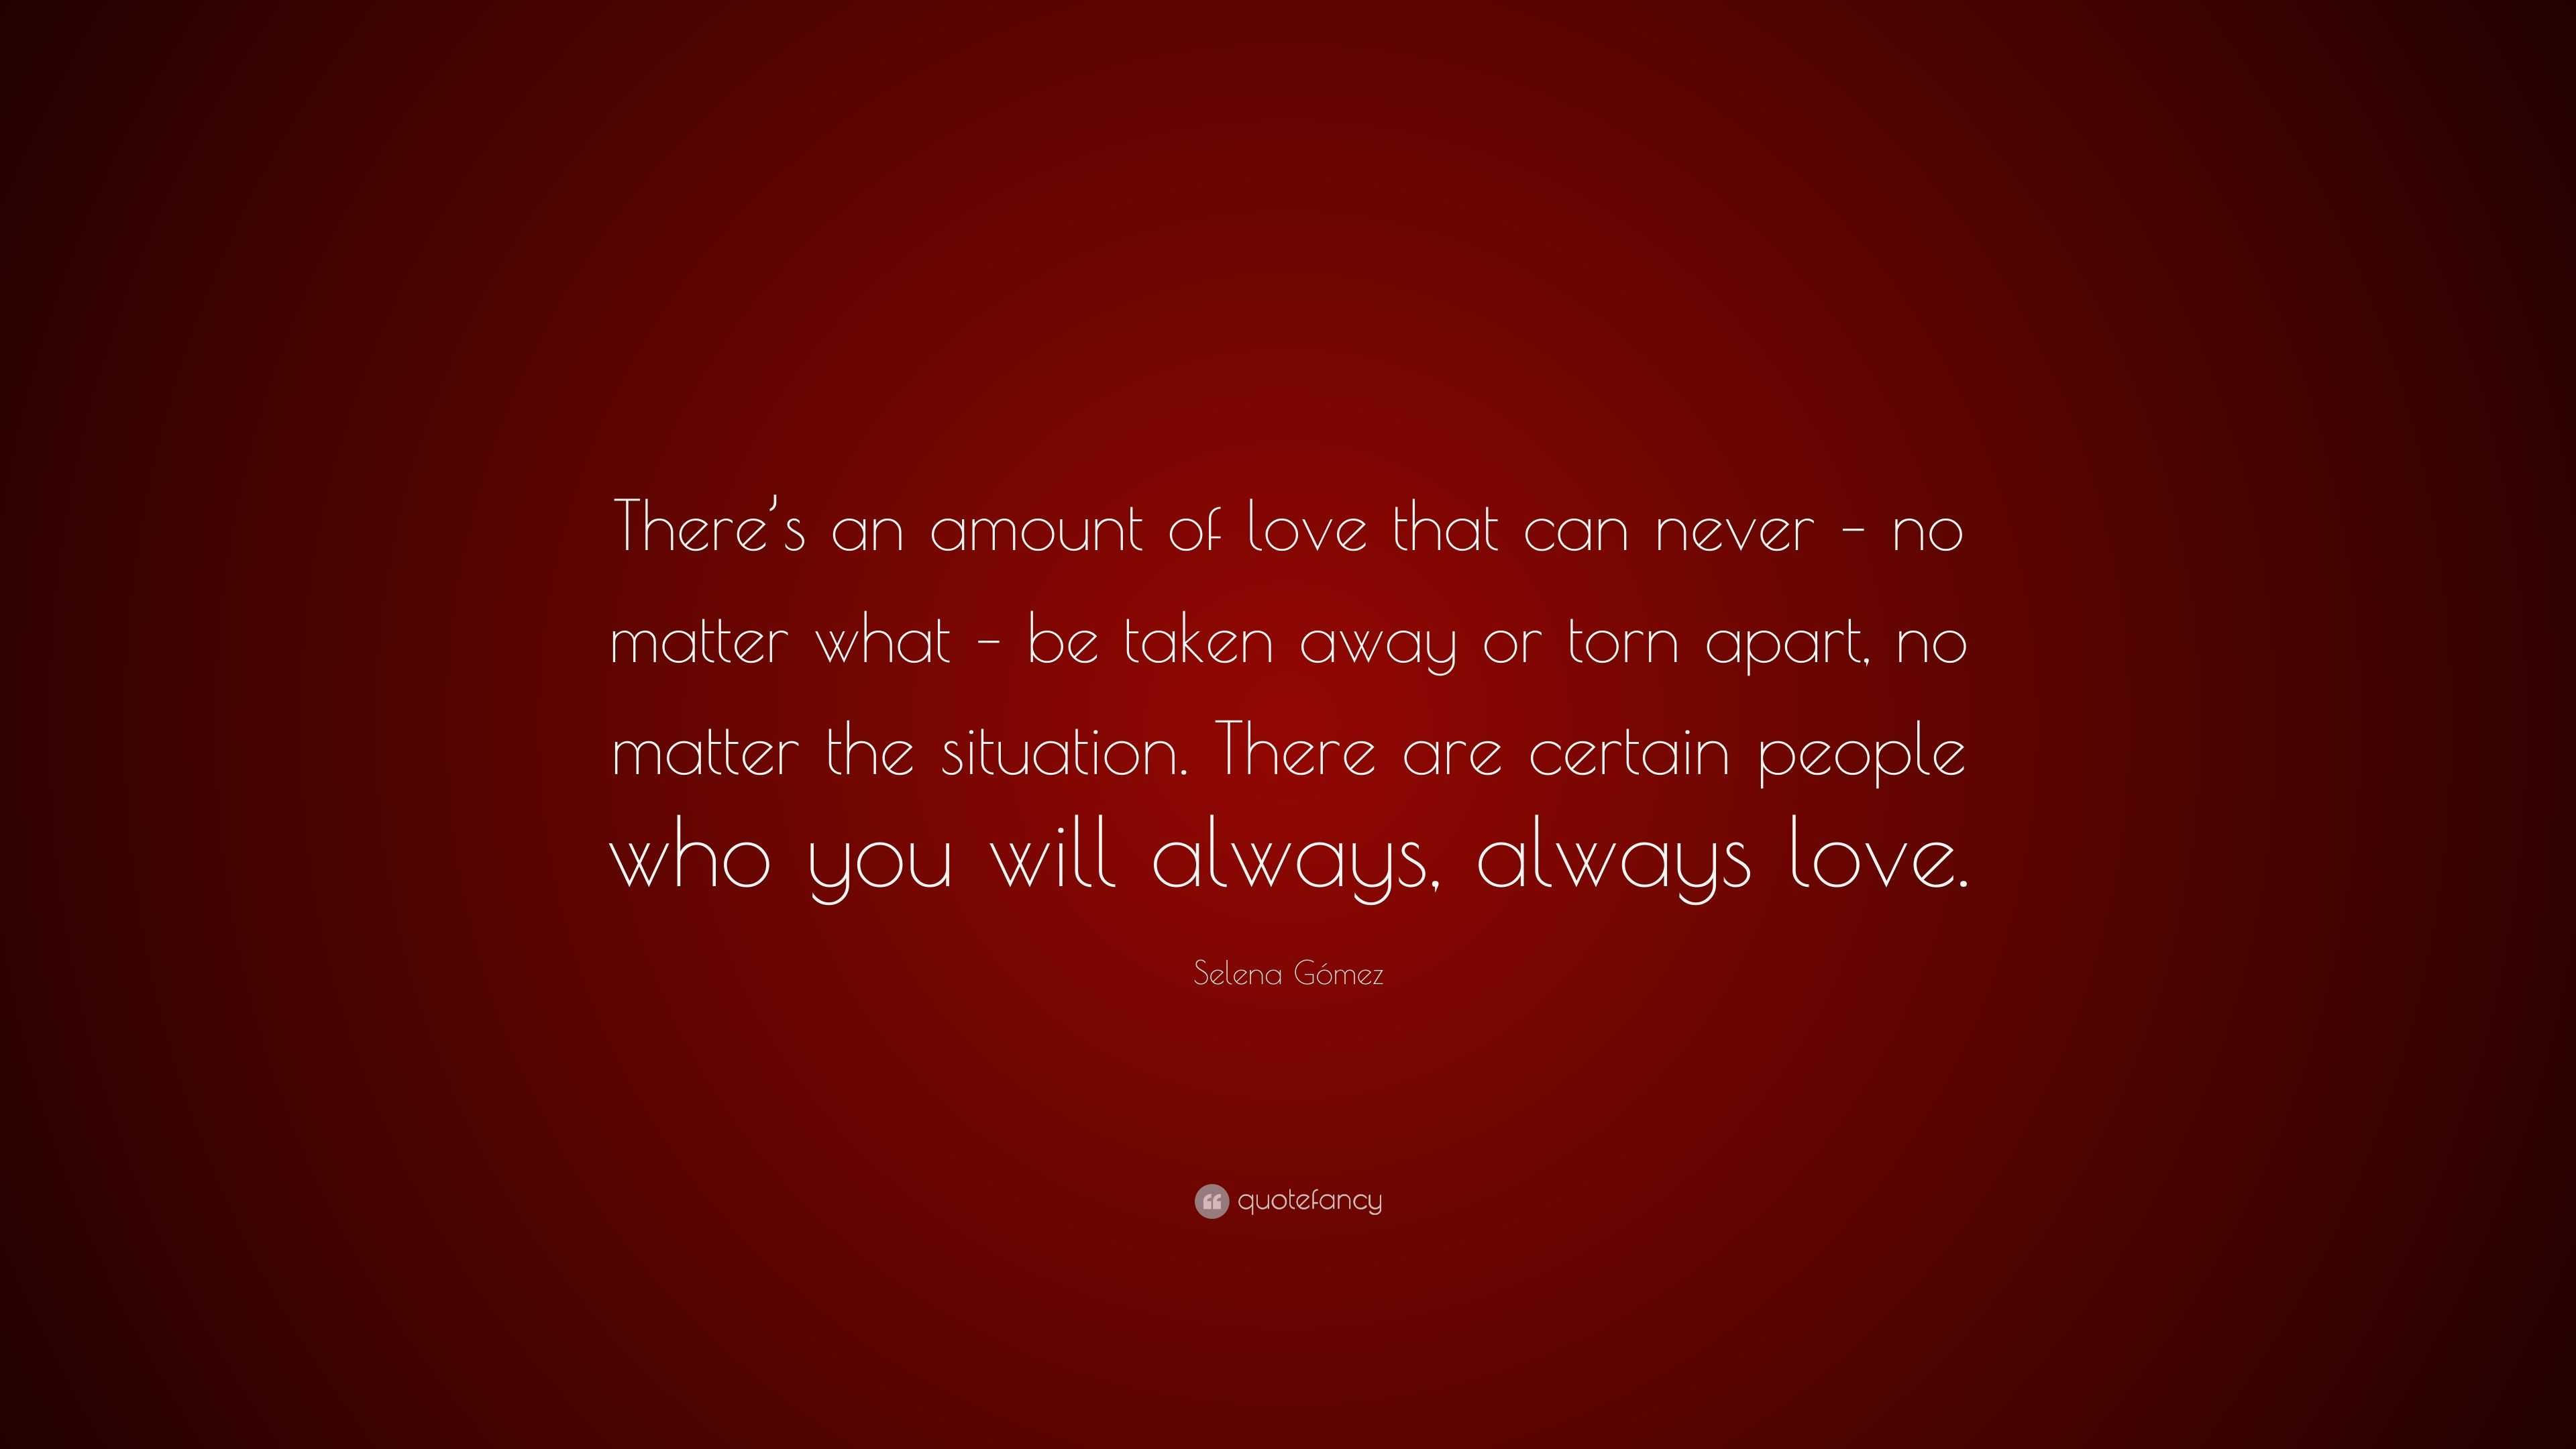 Selena G³mez Quote “There s an amount of love that can never – no matter